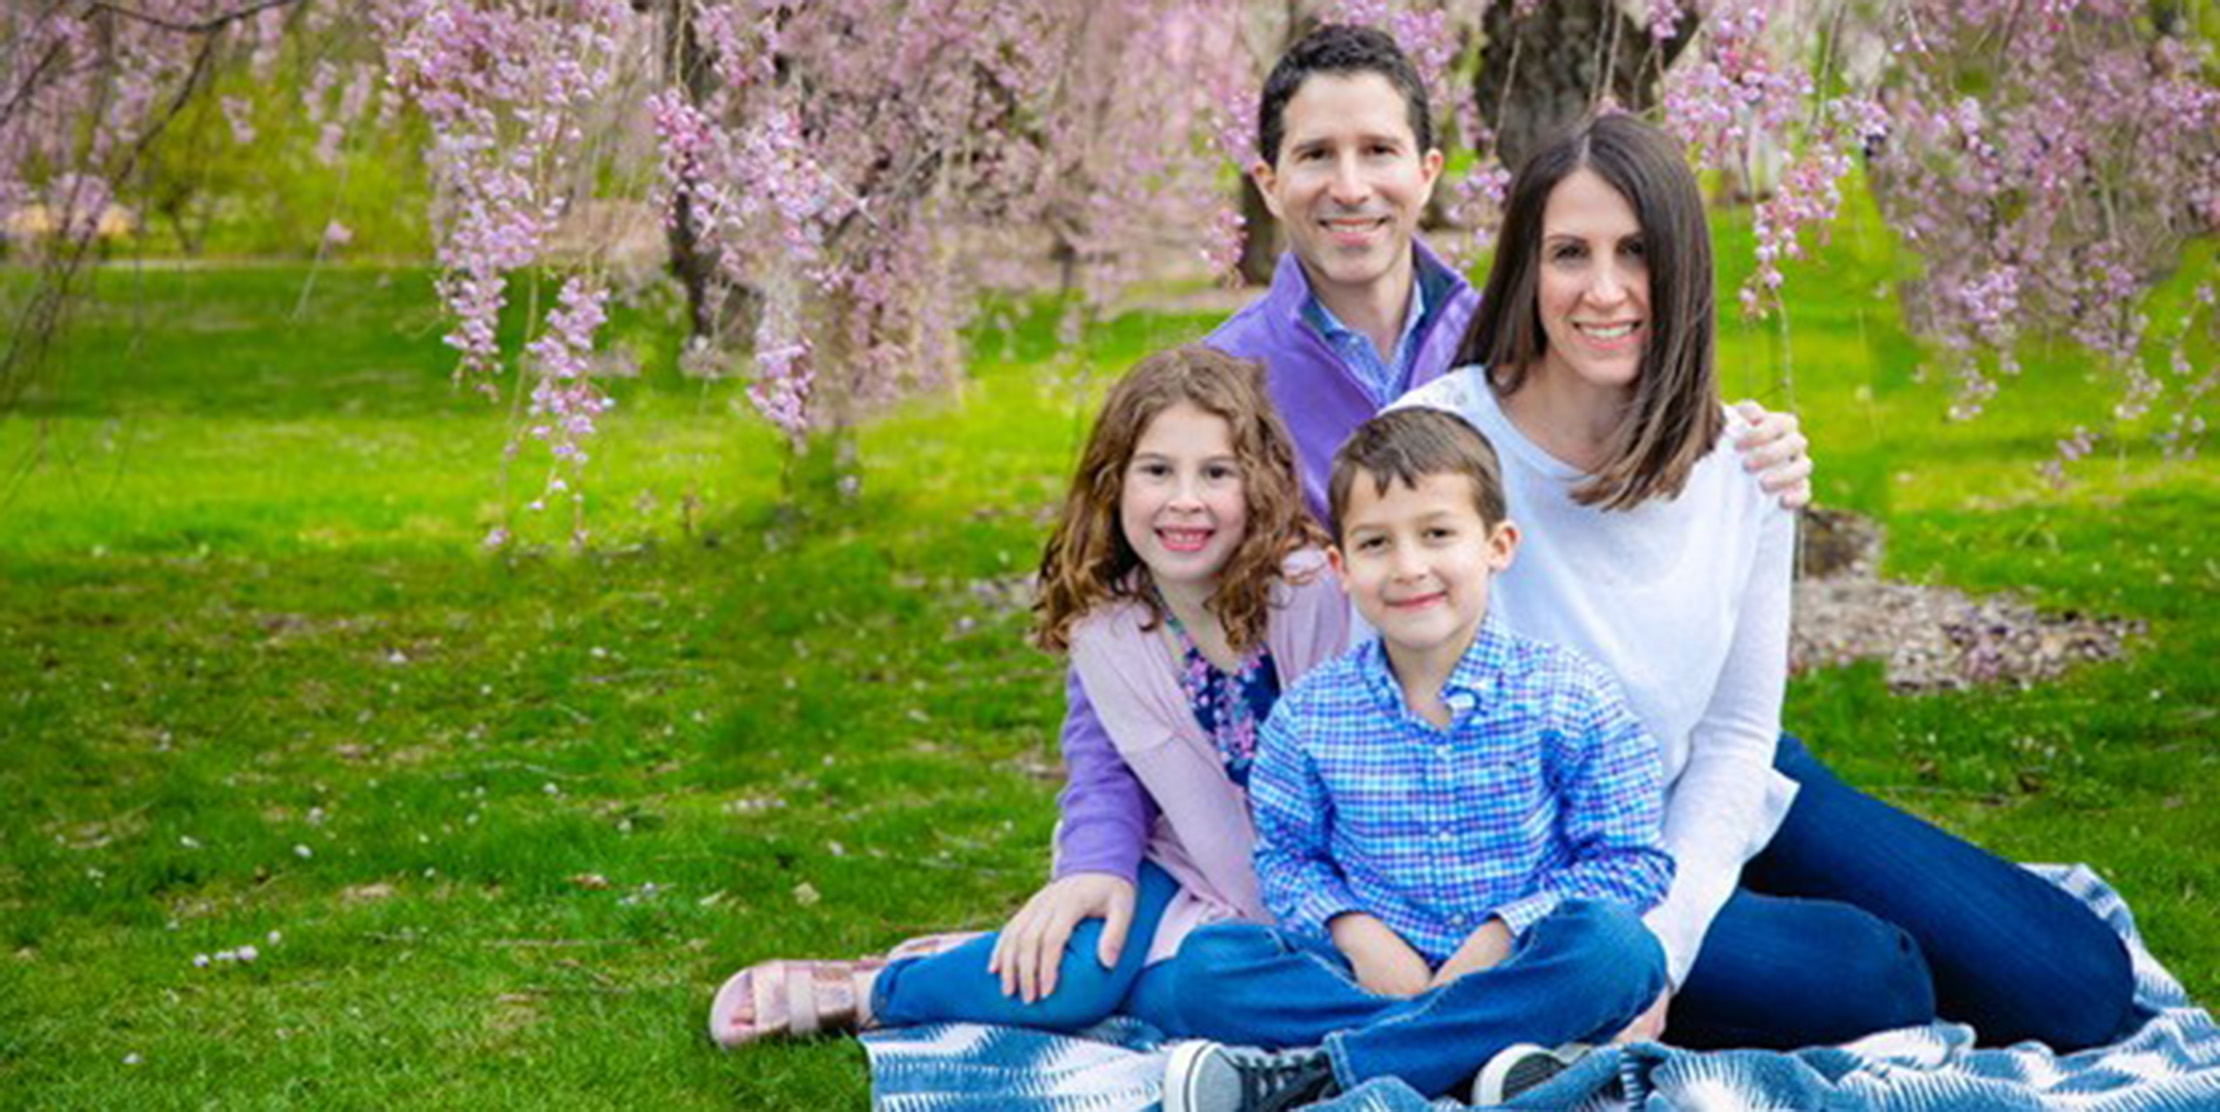 Lori Weiss and family